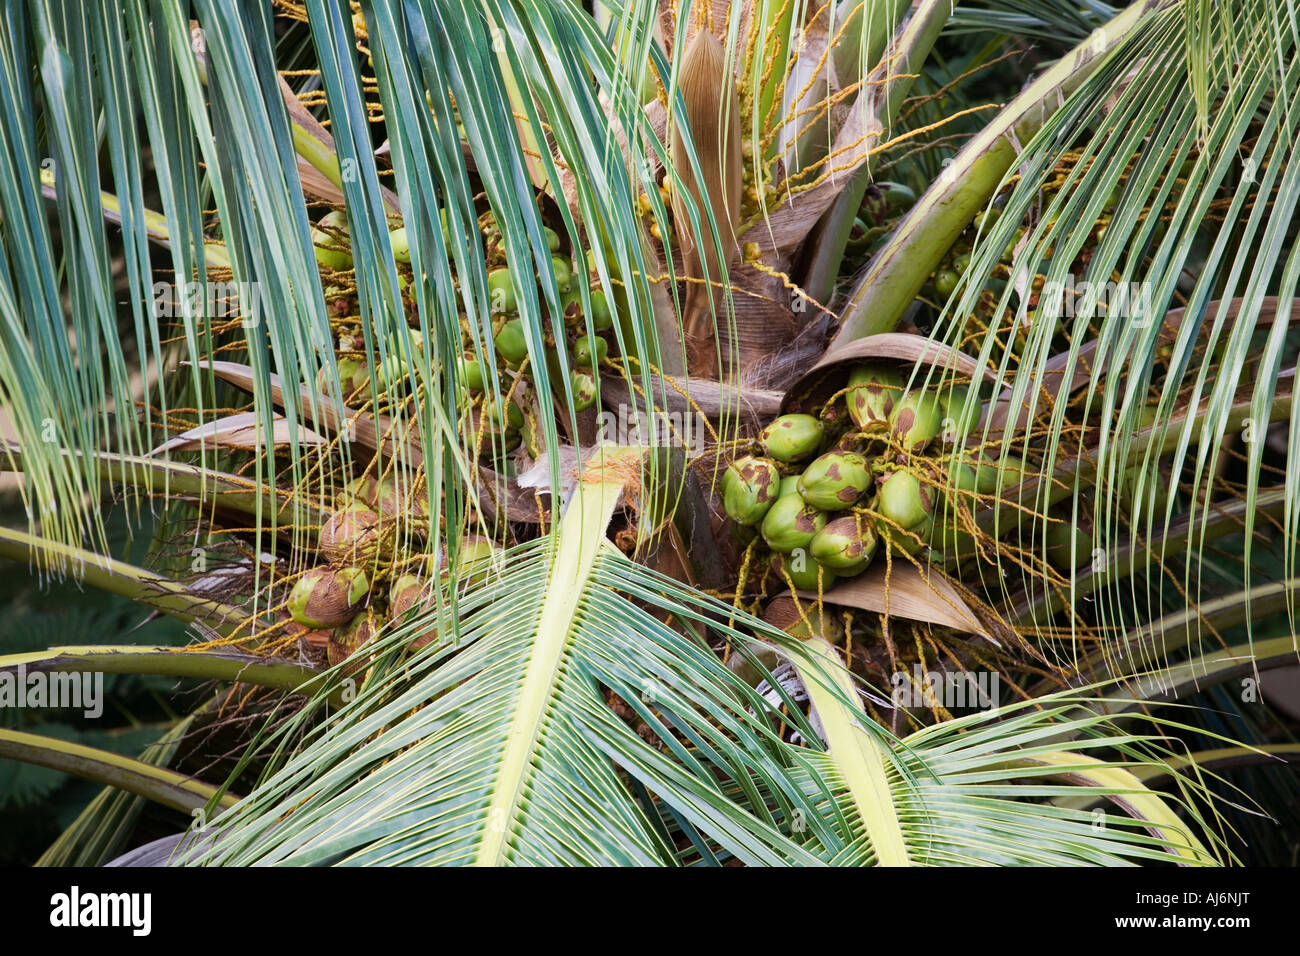 Cocos nucifera. Coconuts growing on a coconut palm tree in India Stock Photo